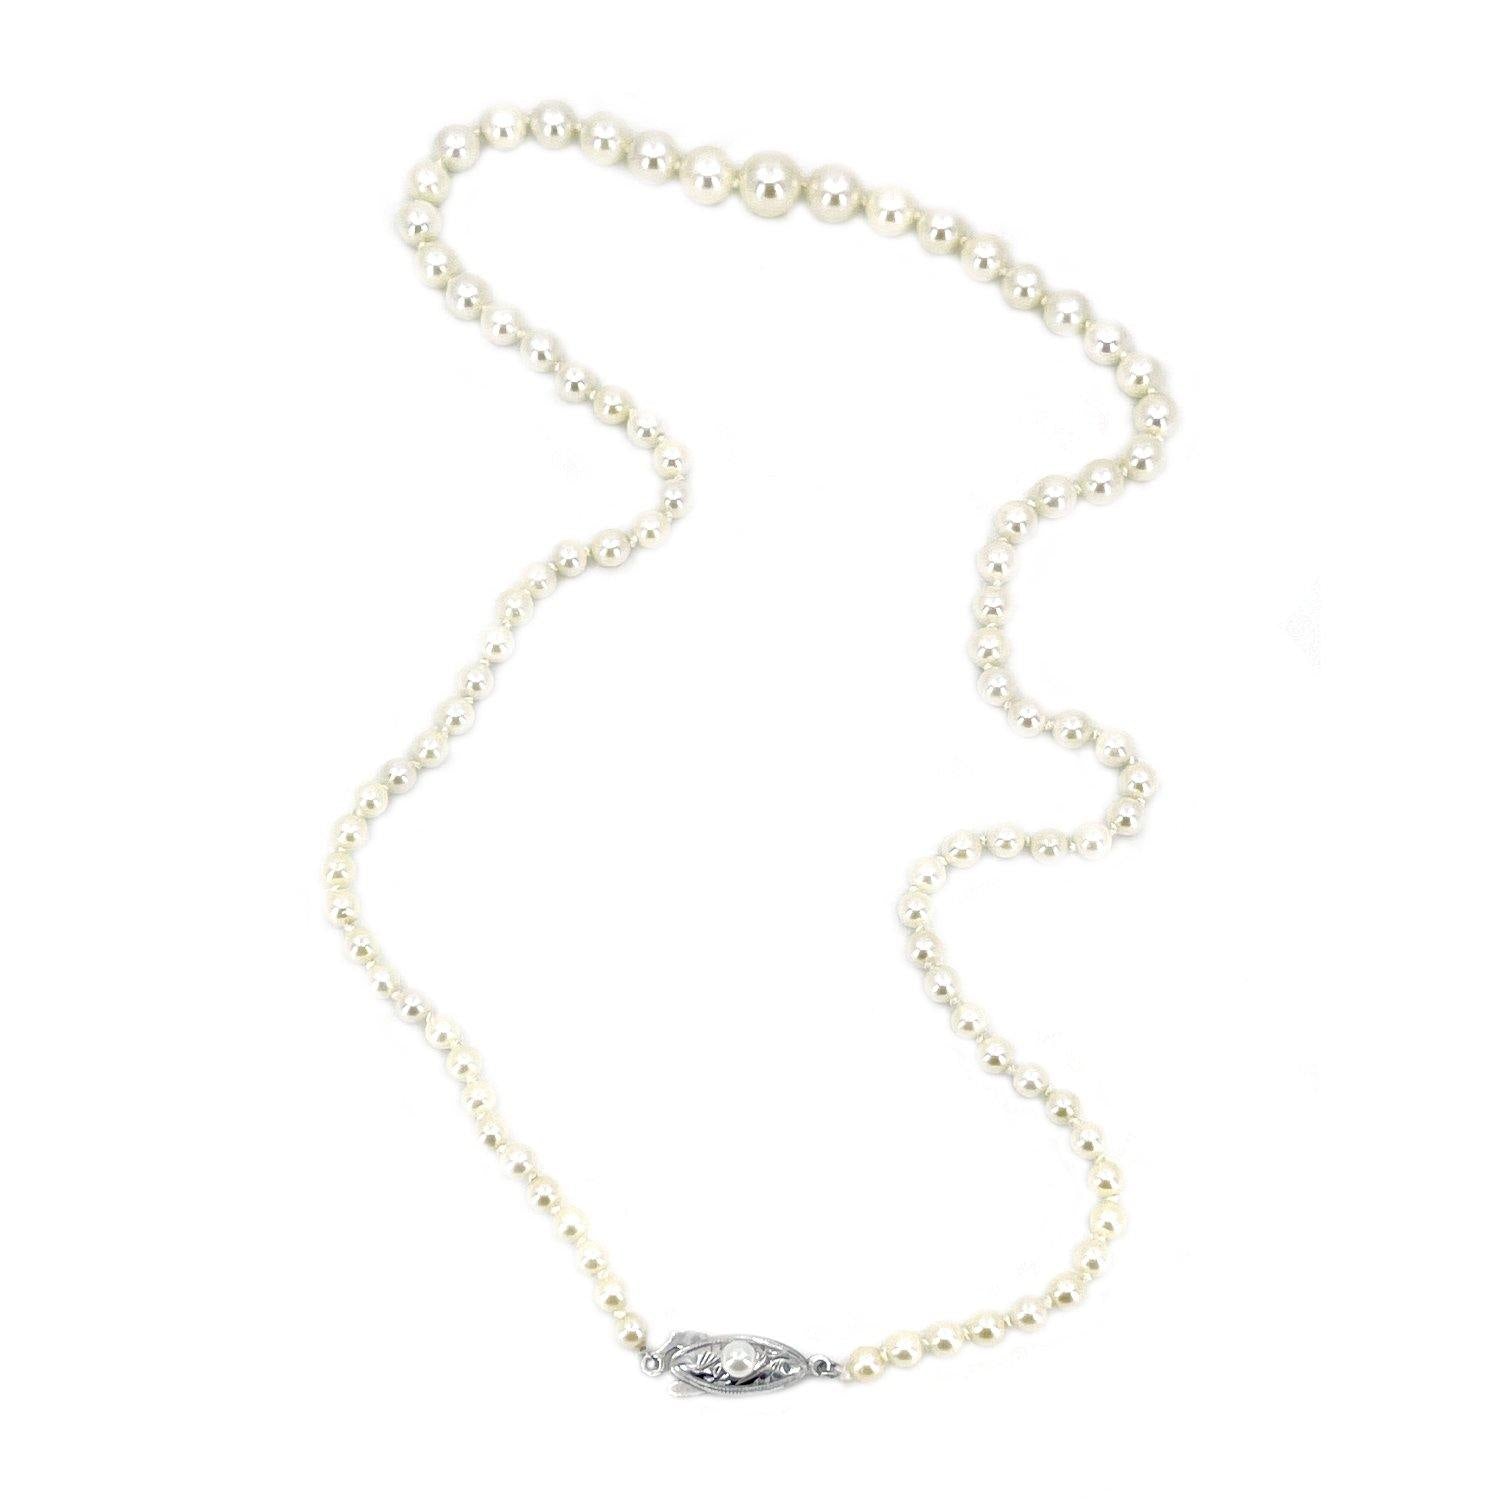 Engraved Deco Milgrain Japanese Saltwater Cultured Akoya Pearl Graduated Necklace - Sterling Silver 19.25 Inch